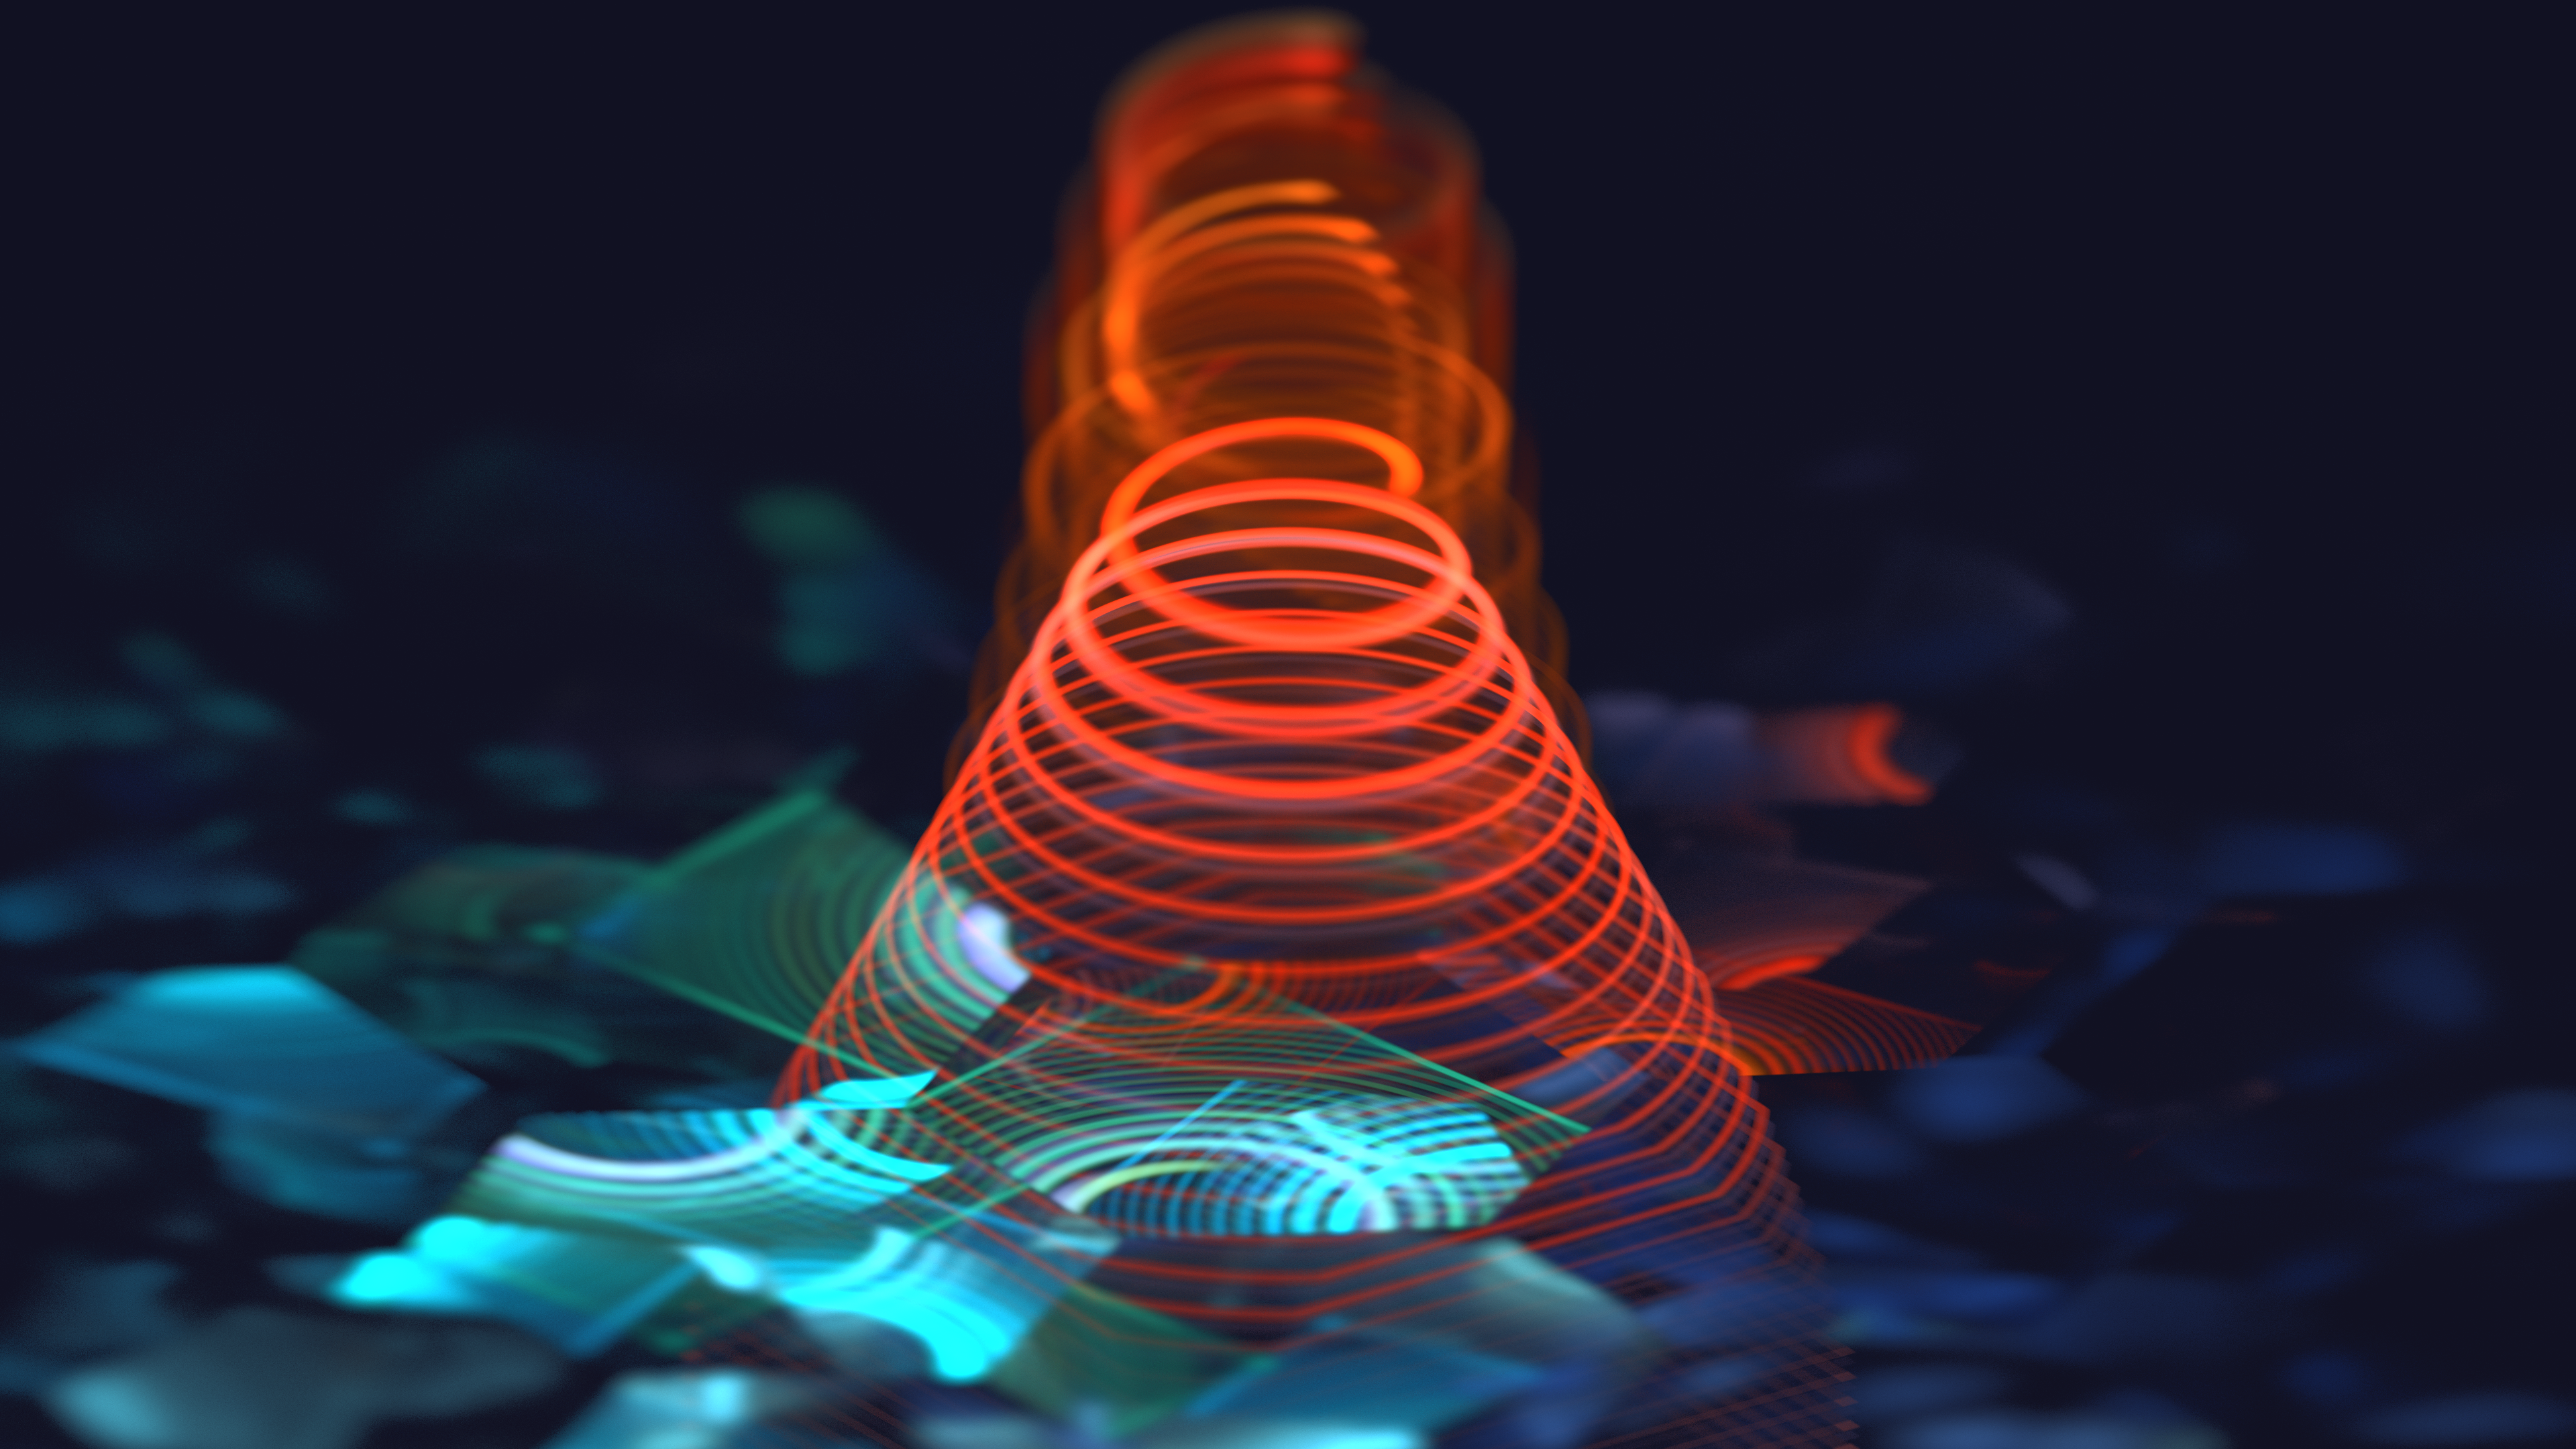 Abstract 3D Abstract Fractal Apophysis 3840x2160